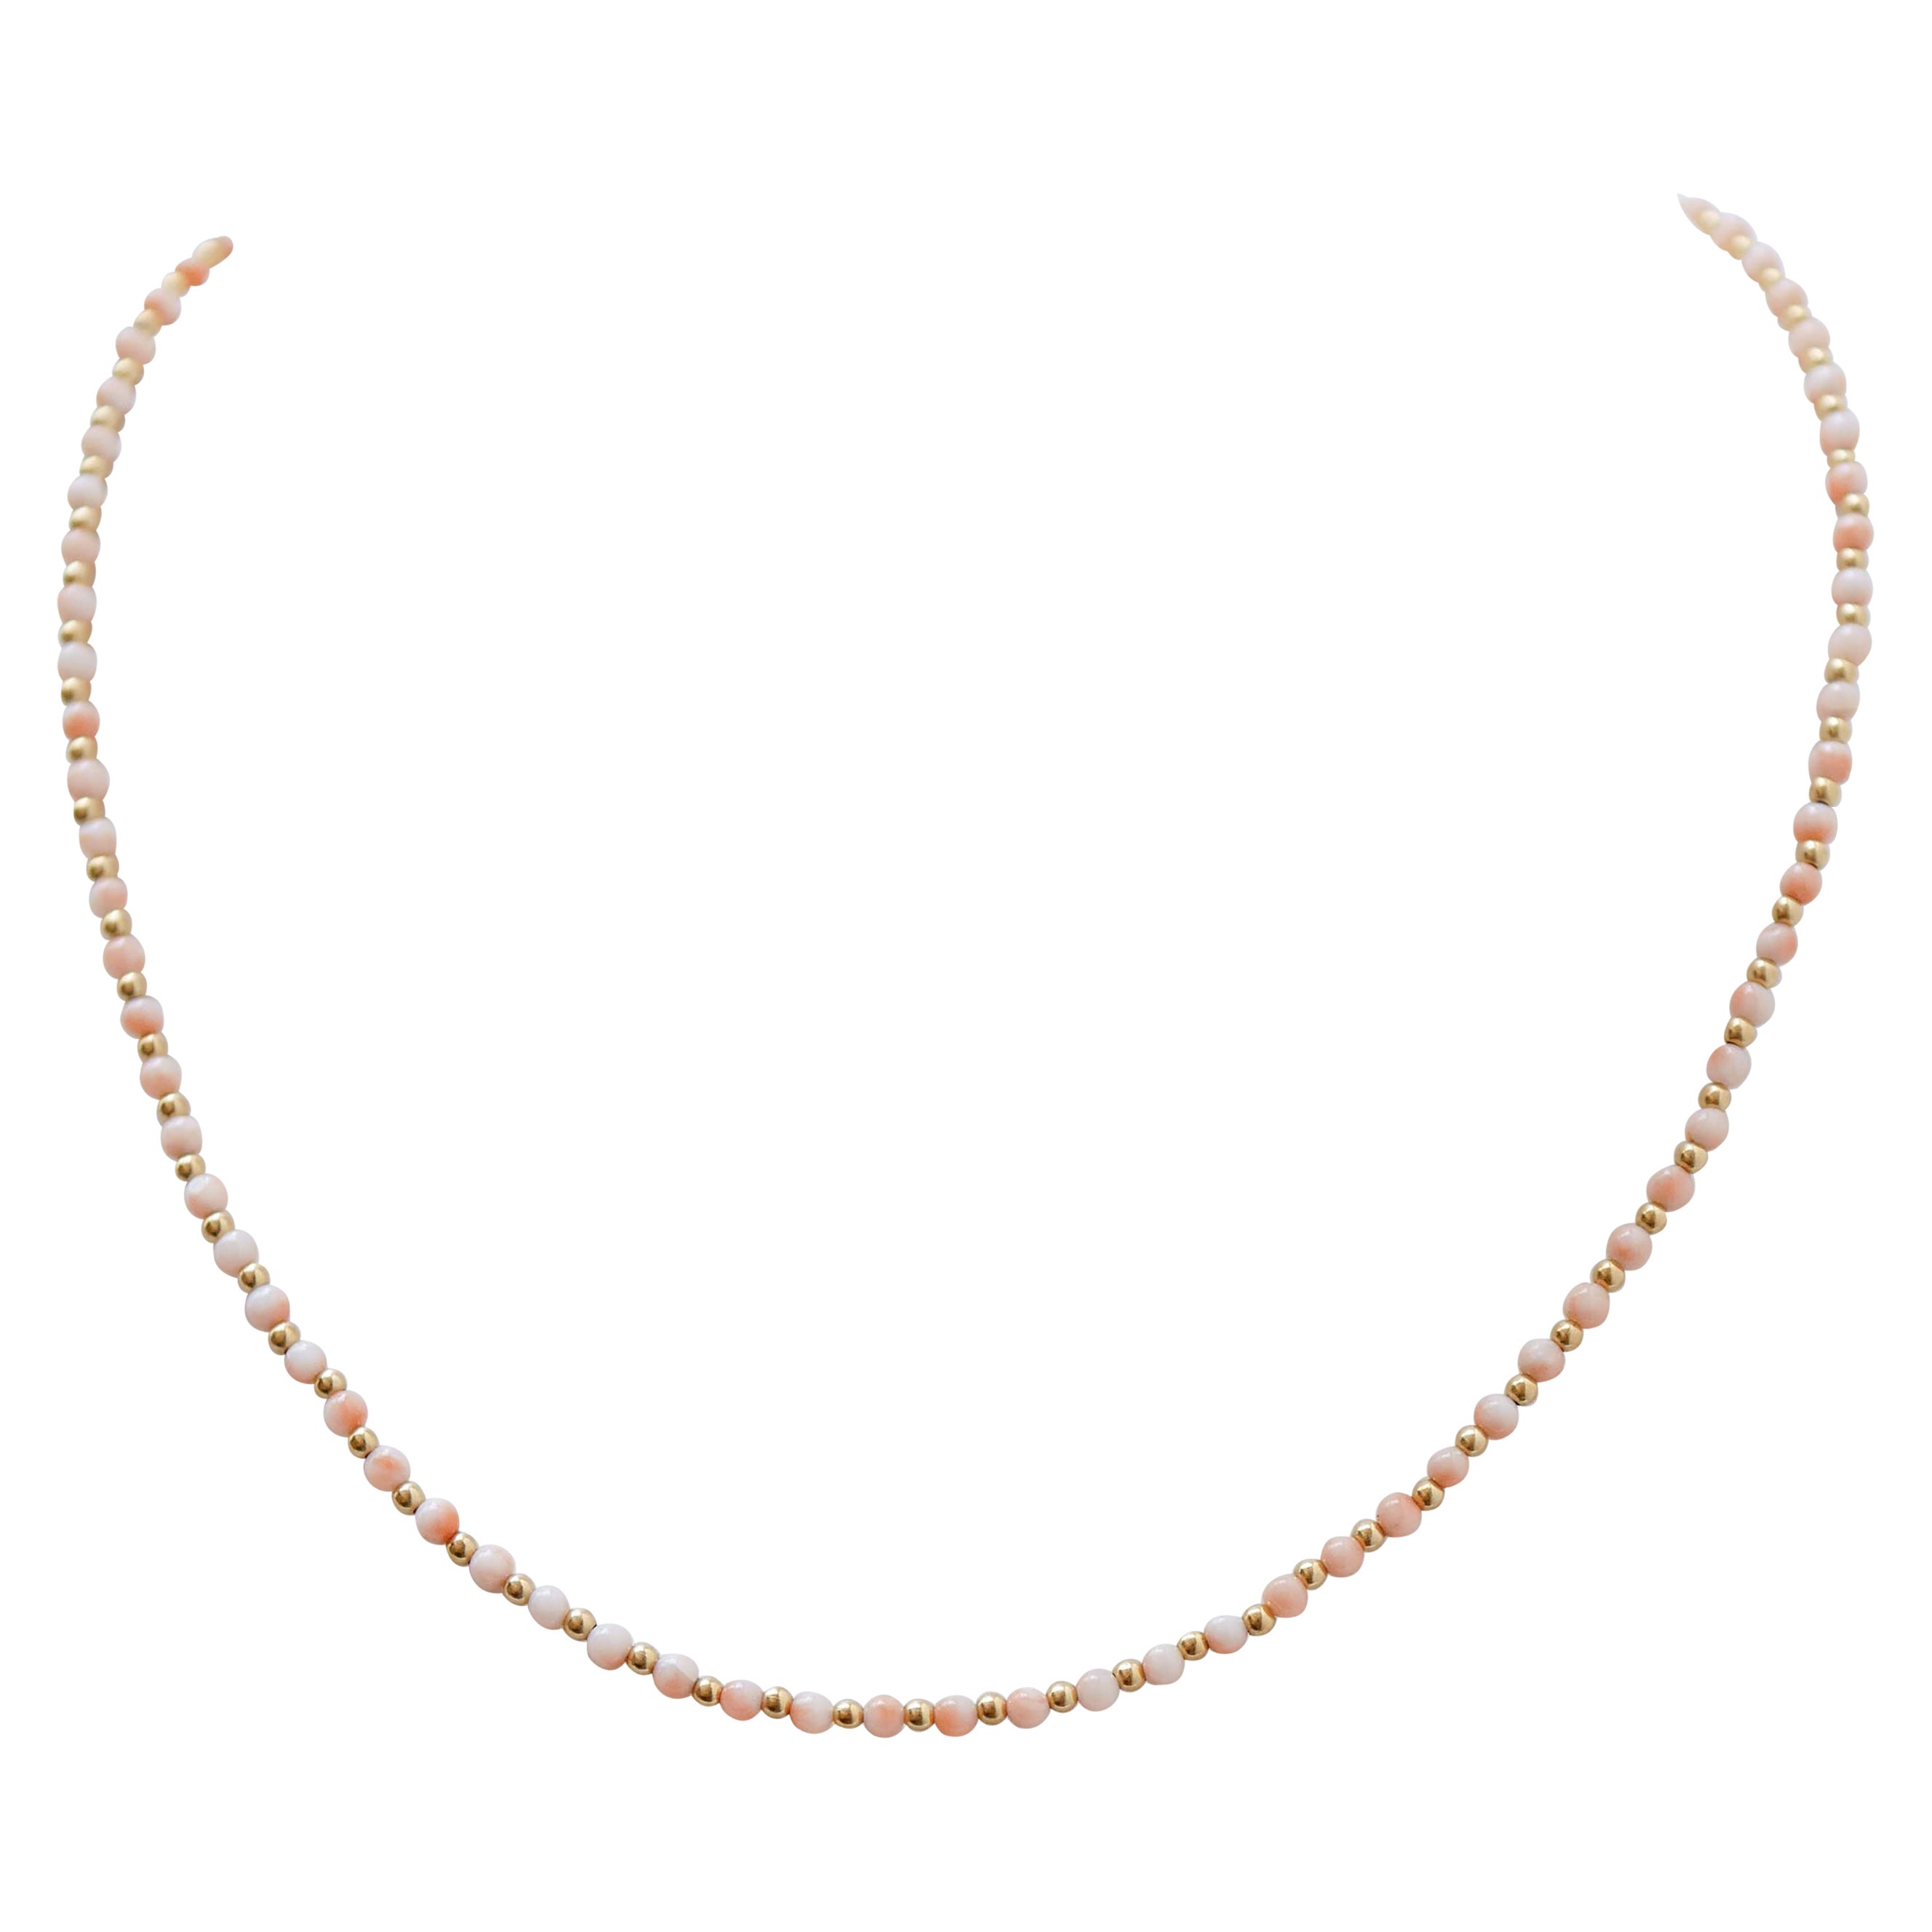 Coral, 18 Karat Yellow Gold Necklace. For Sale